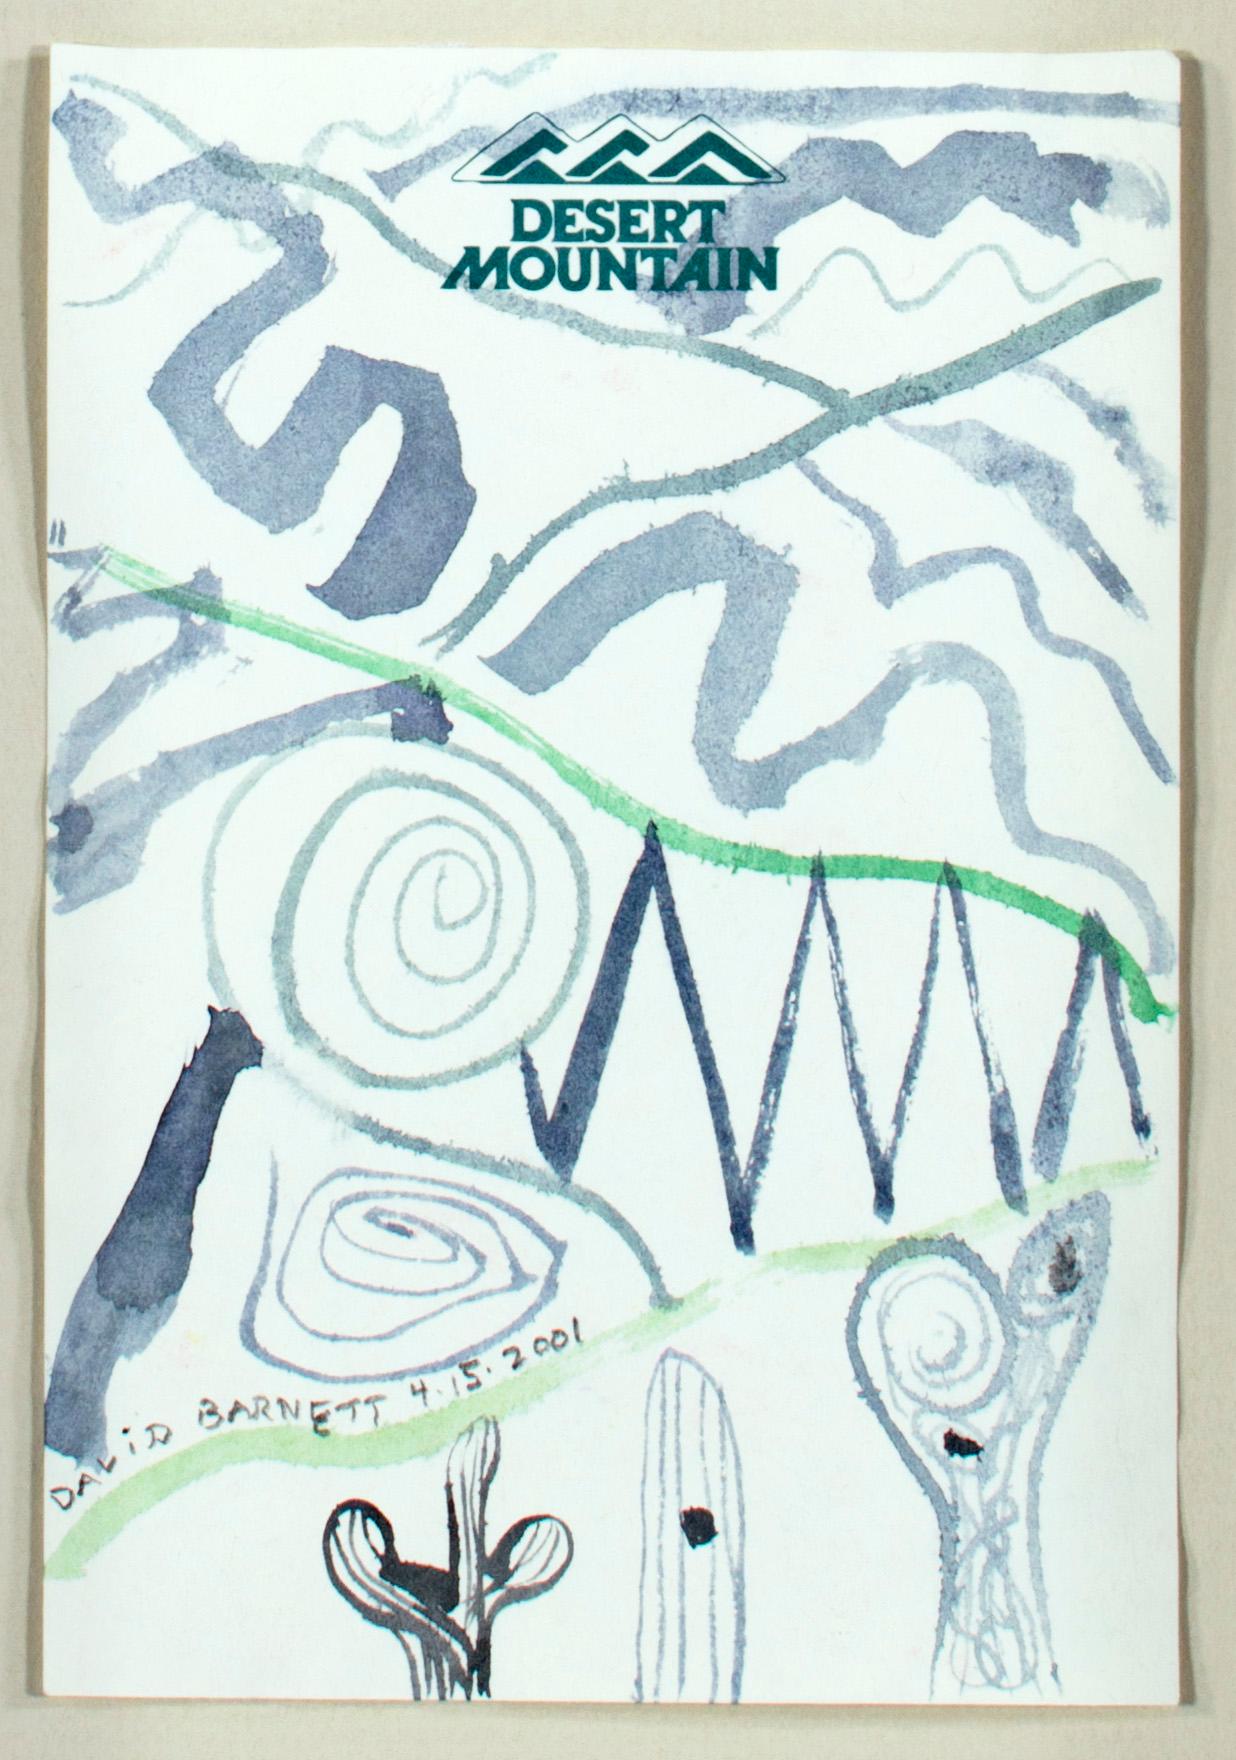 'Desert Mountain Paths' original signed watercolor painting on notepad paper  - Art by David Barnett